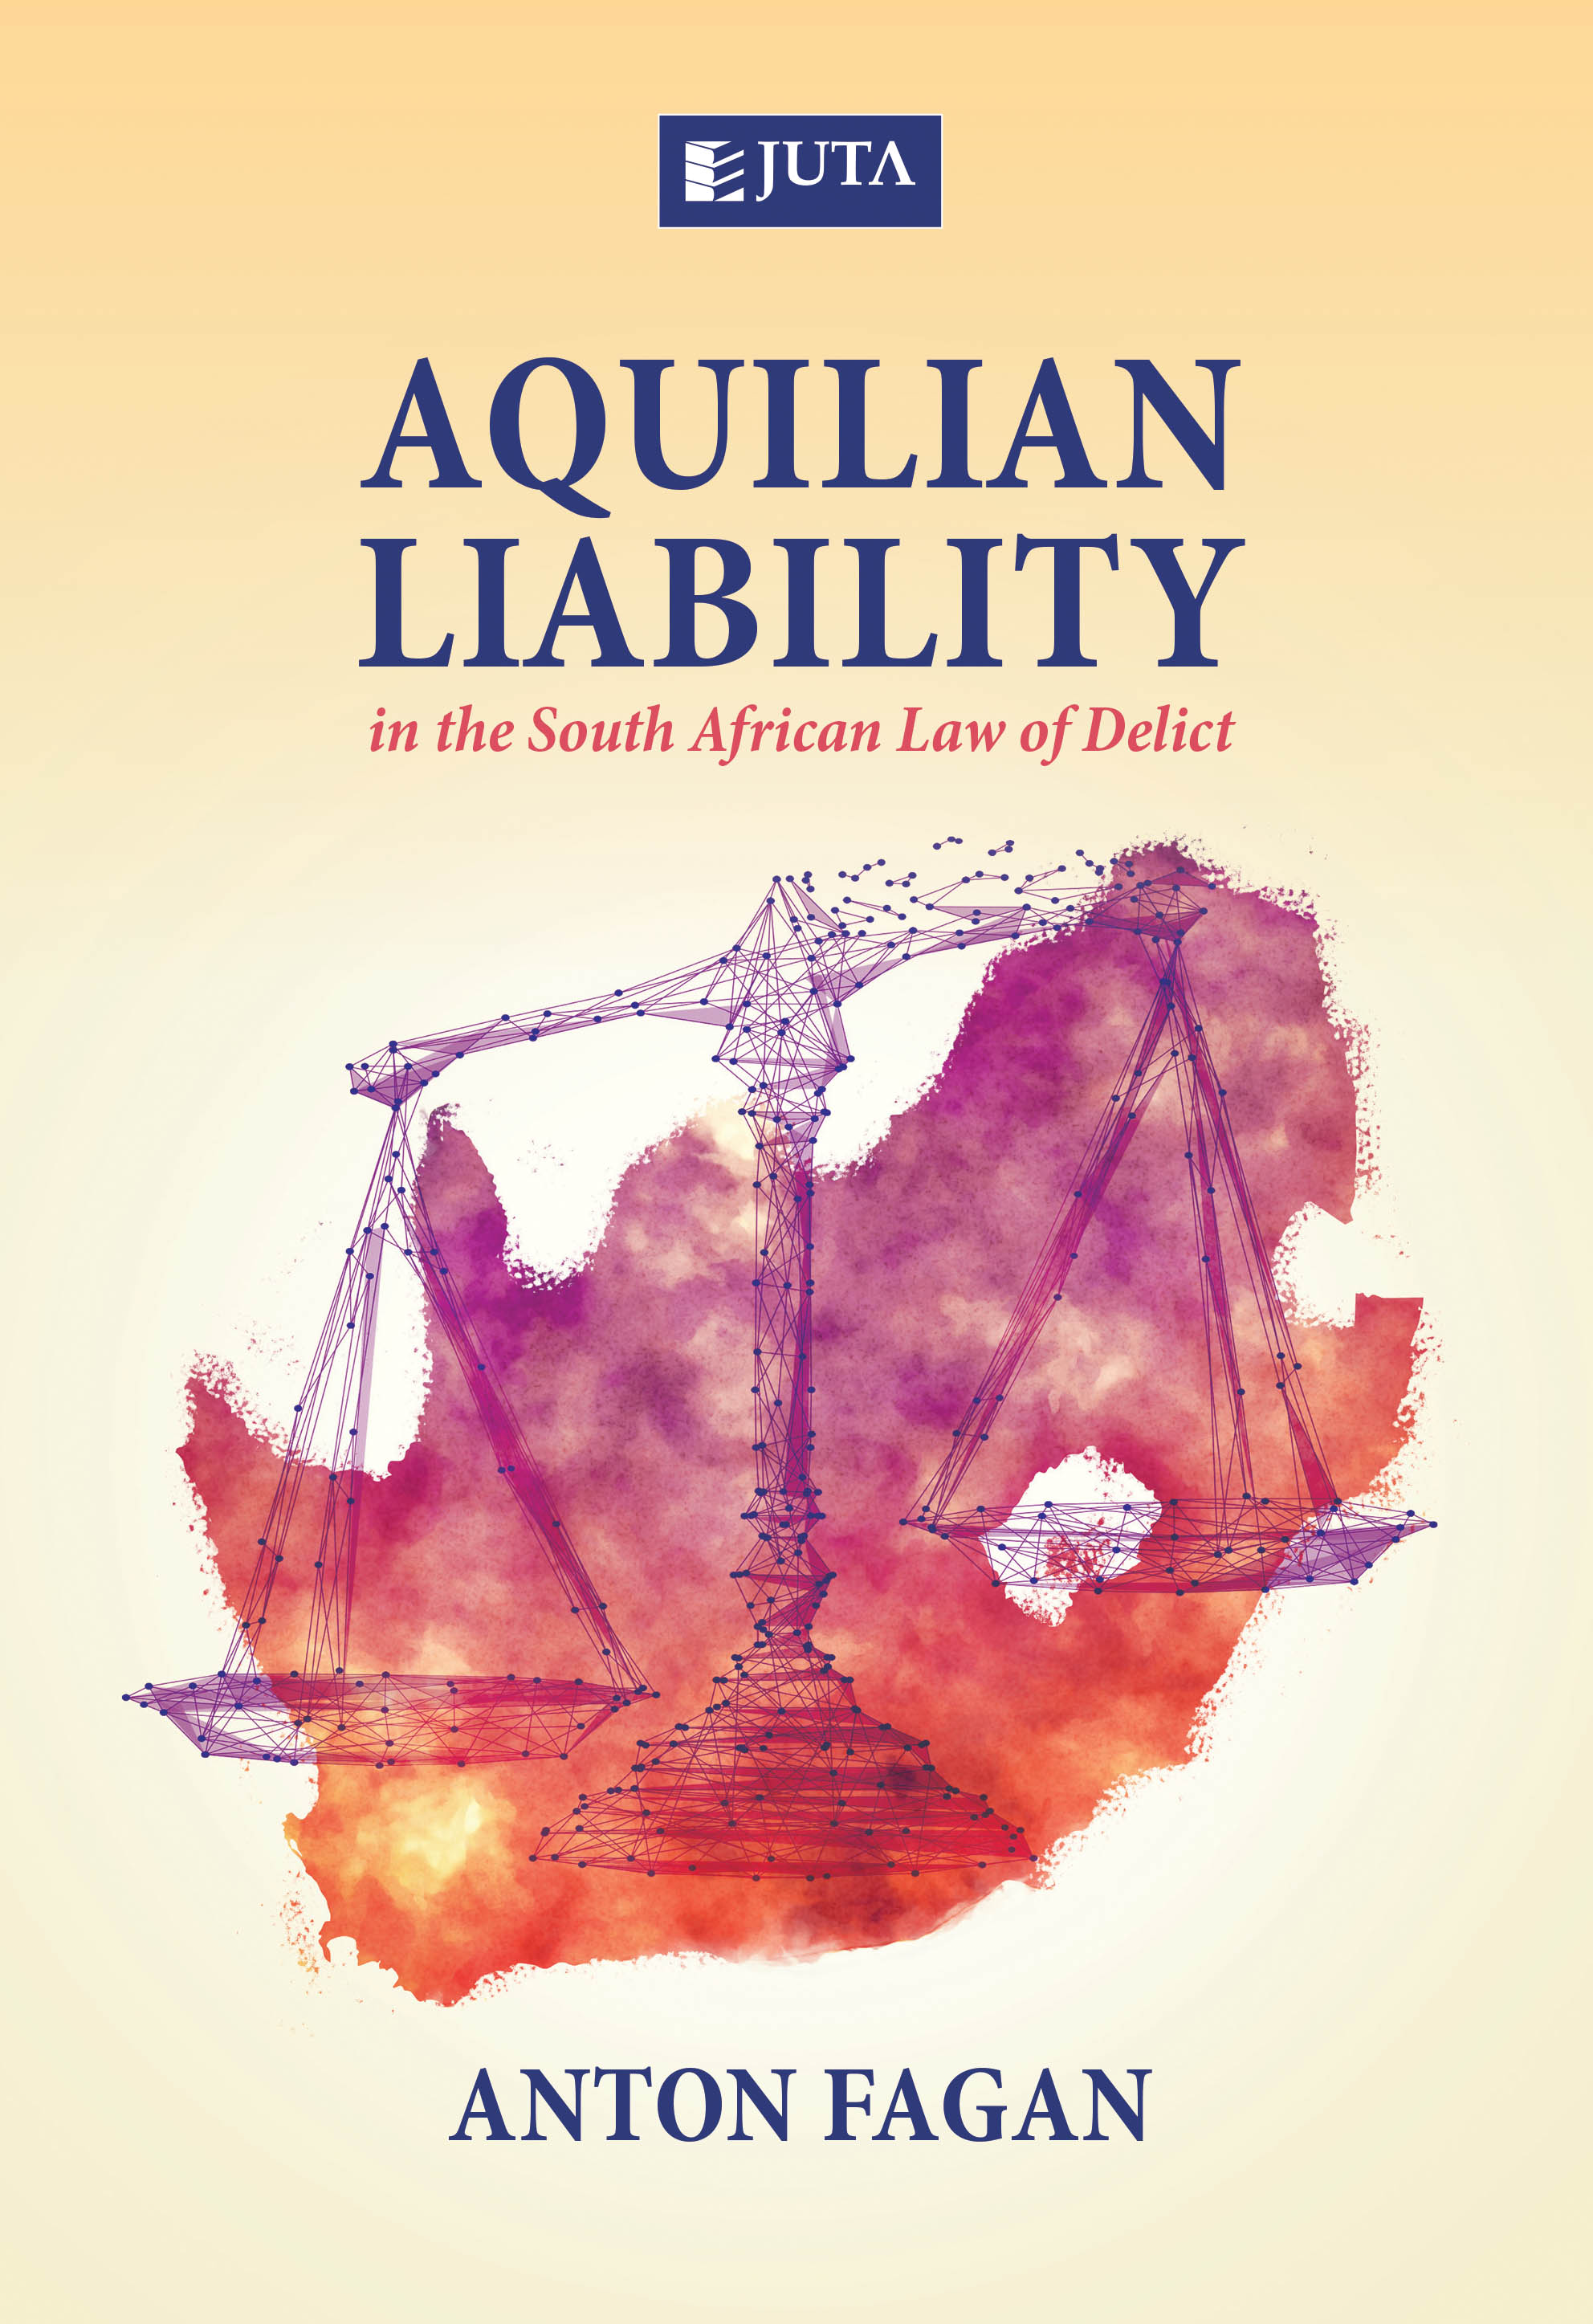 Aquilian Liability in the South African Law of Delict